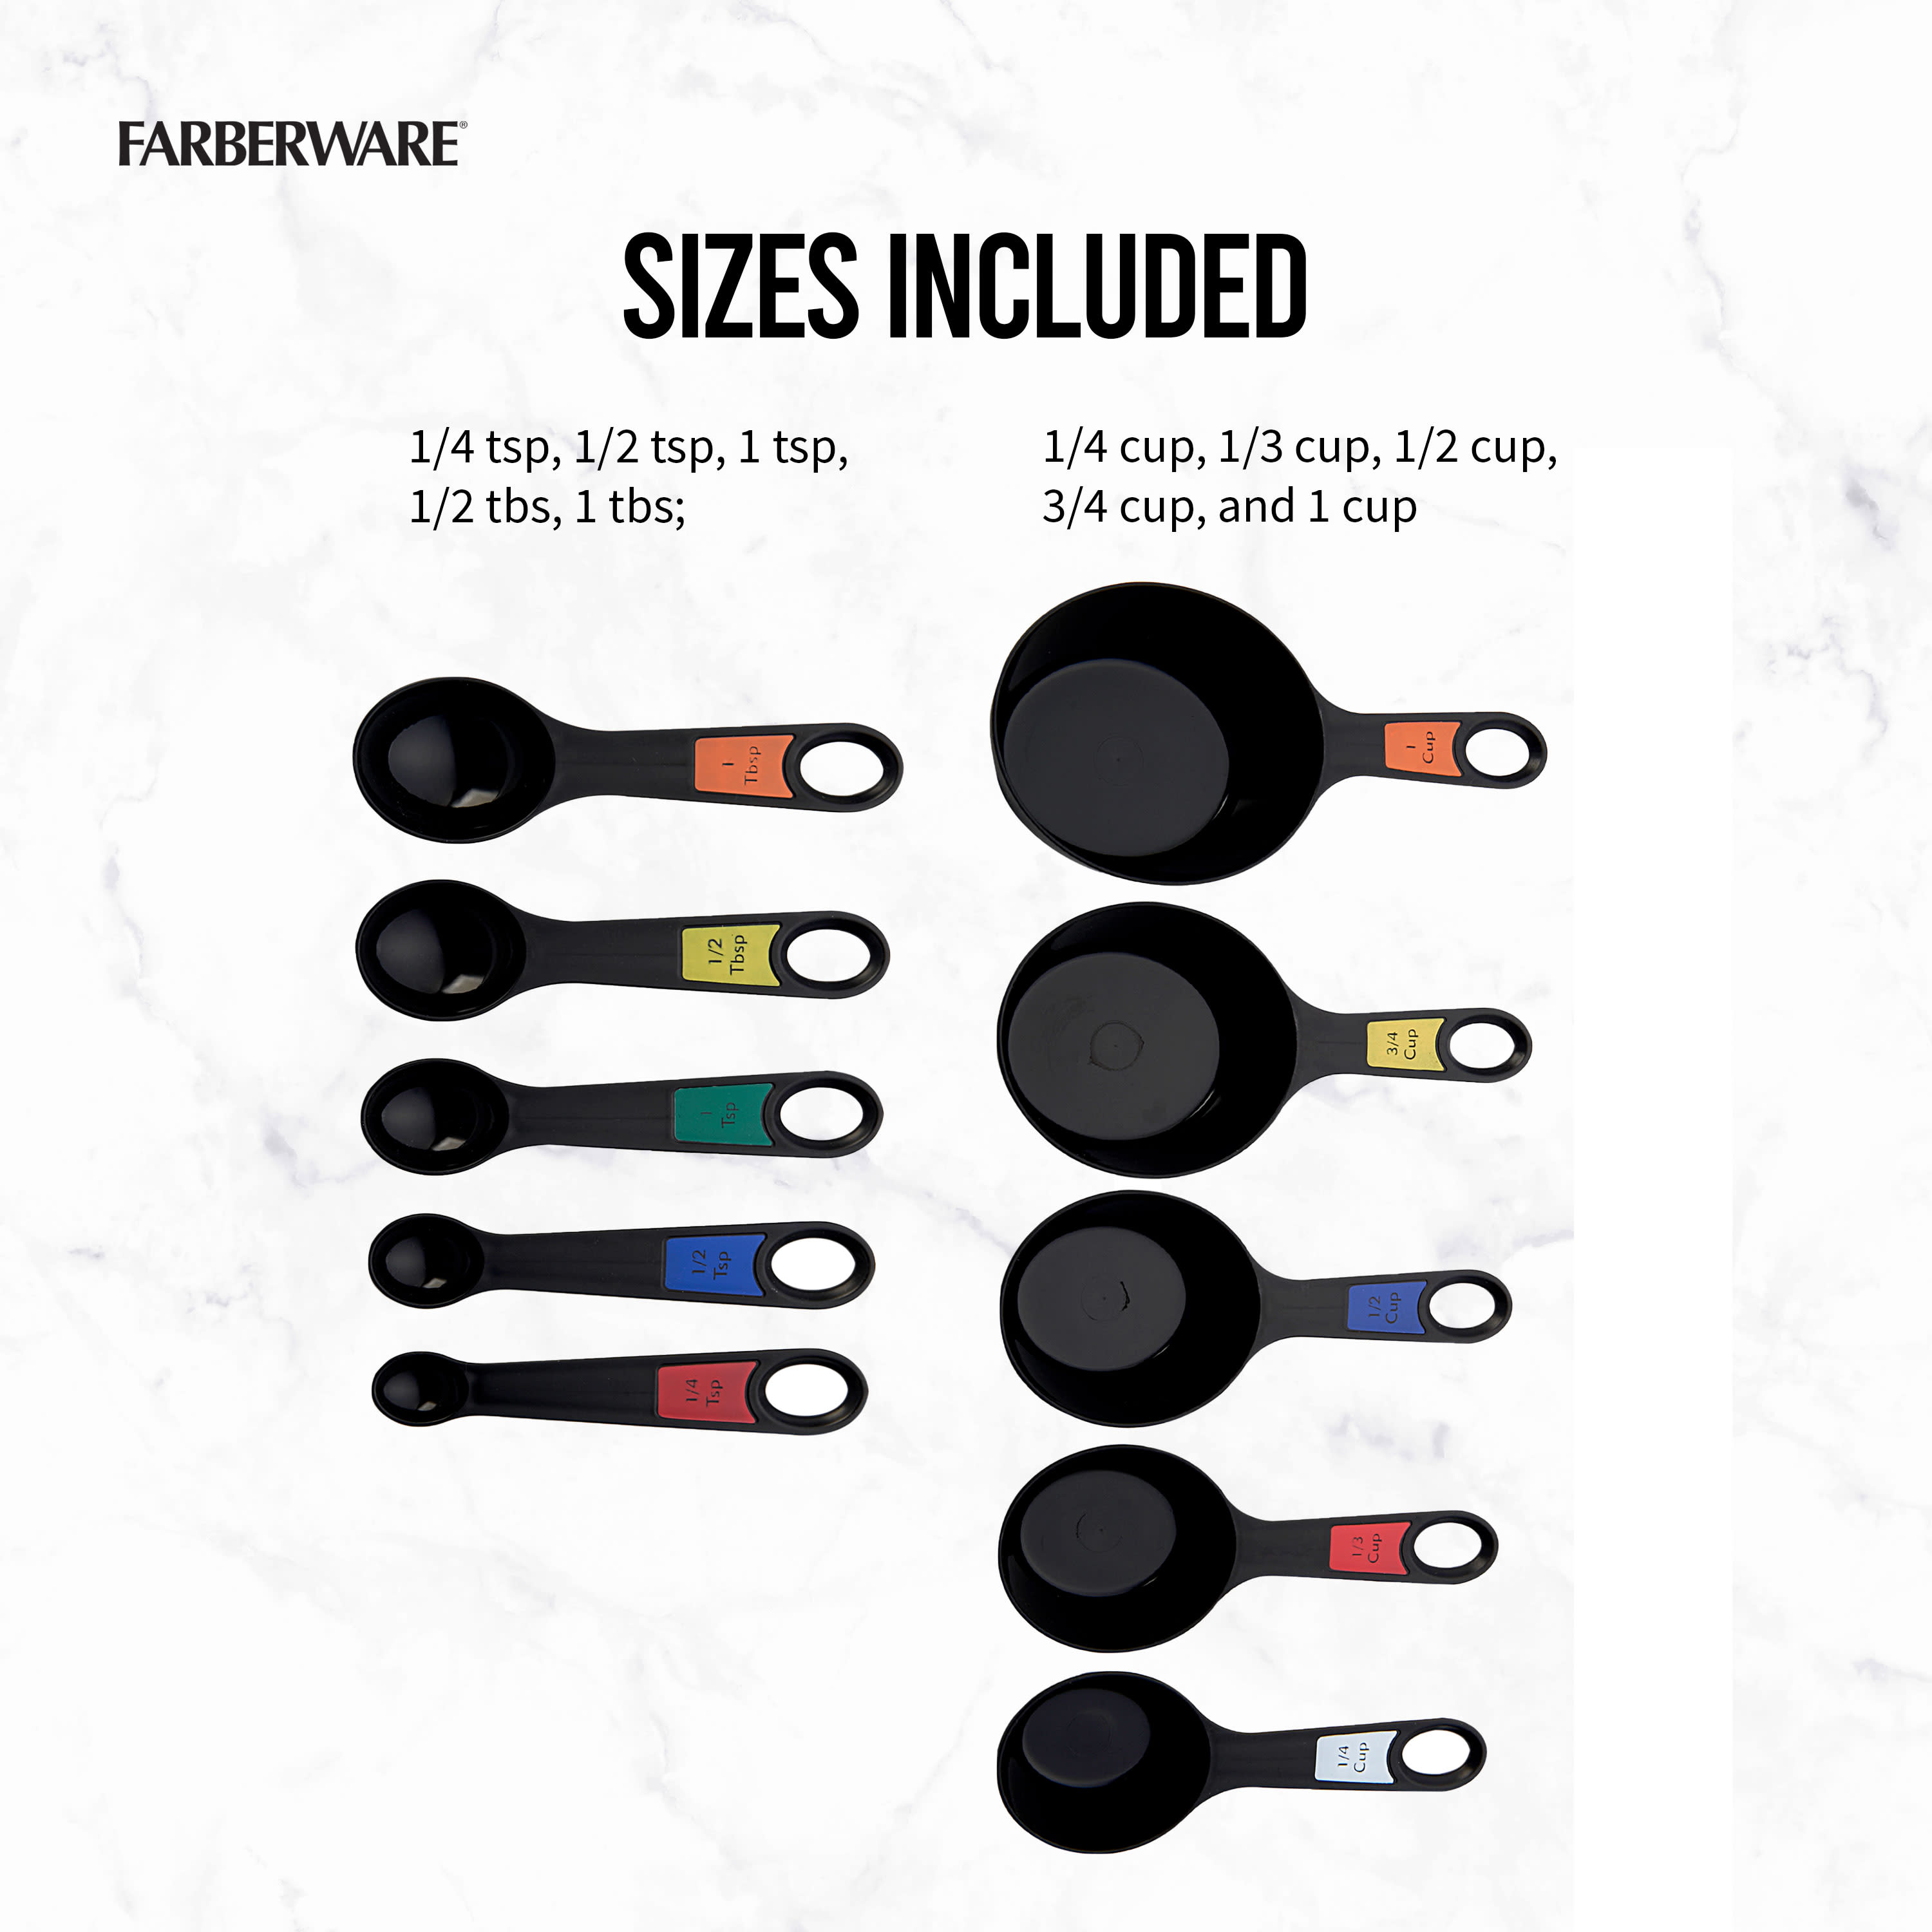 Farberware Professional 10 Piece Plastic Measuring Cup and Spoon Set Black - image 5 of 12